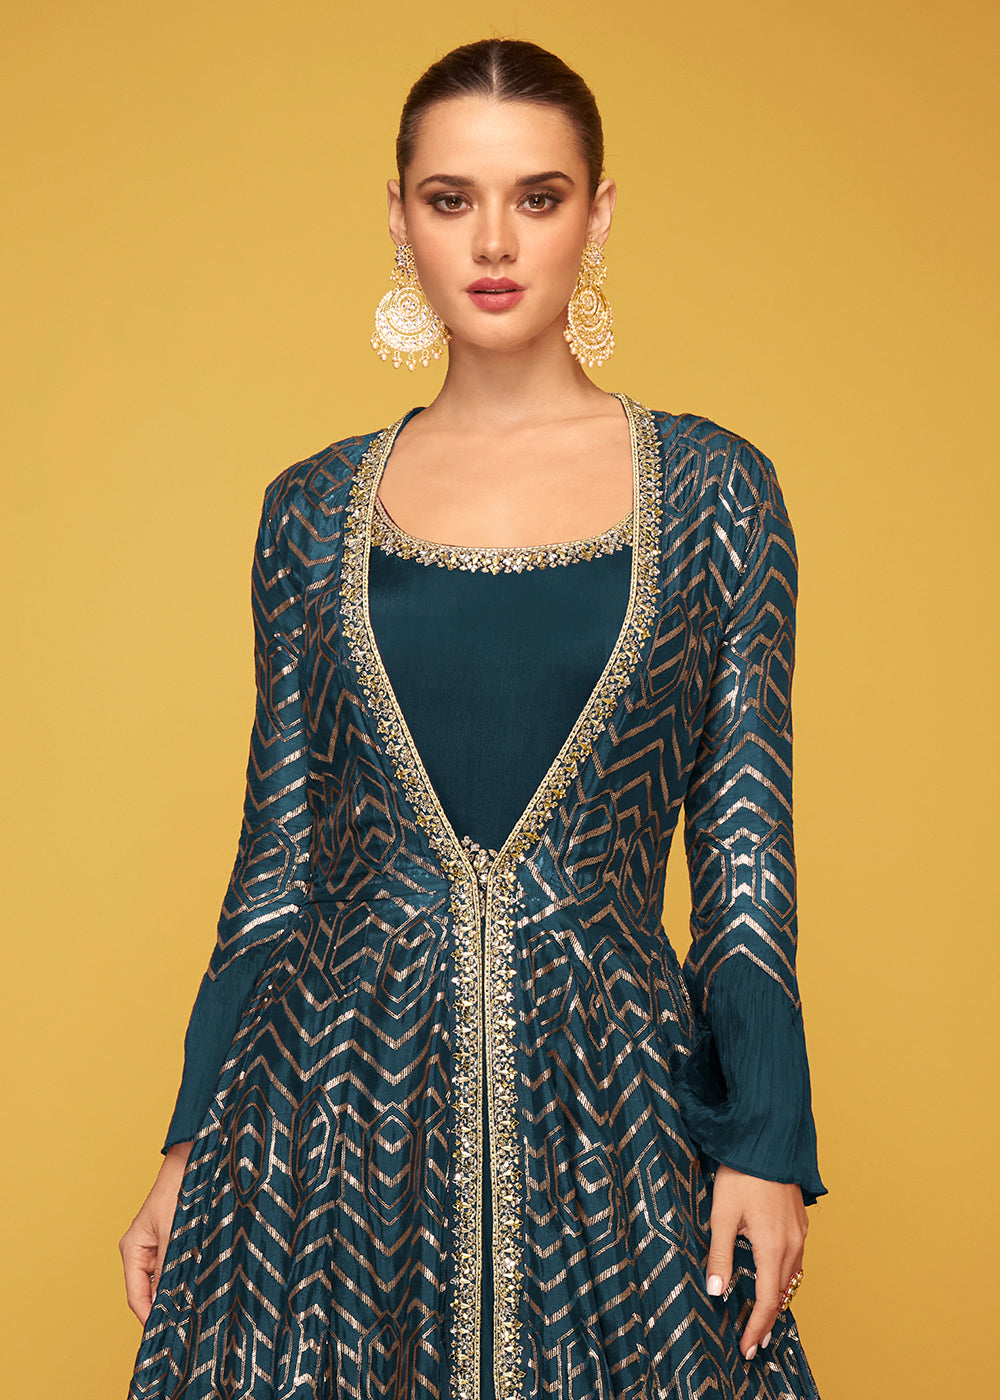 Buy Now Tempting Blue Chinon Fabric Jacket Style Designer Anarkali Gown Online in USA, UK, Australia, New Zealand, Canada & Worldwide at Empress Clothing. 